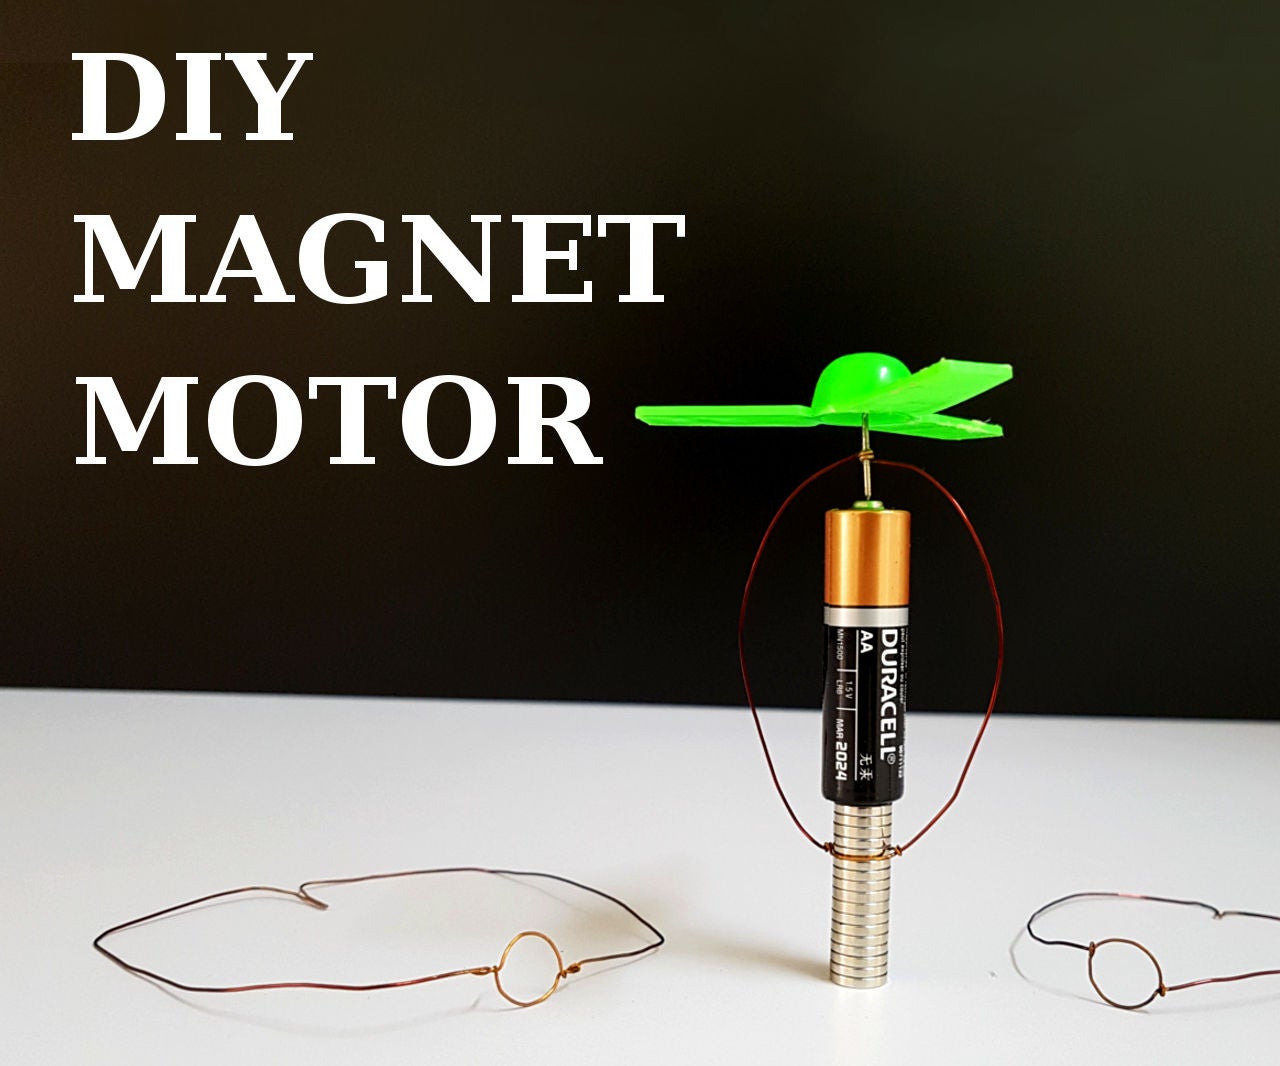 How to Make a Motor From Neodymium Magnets